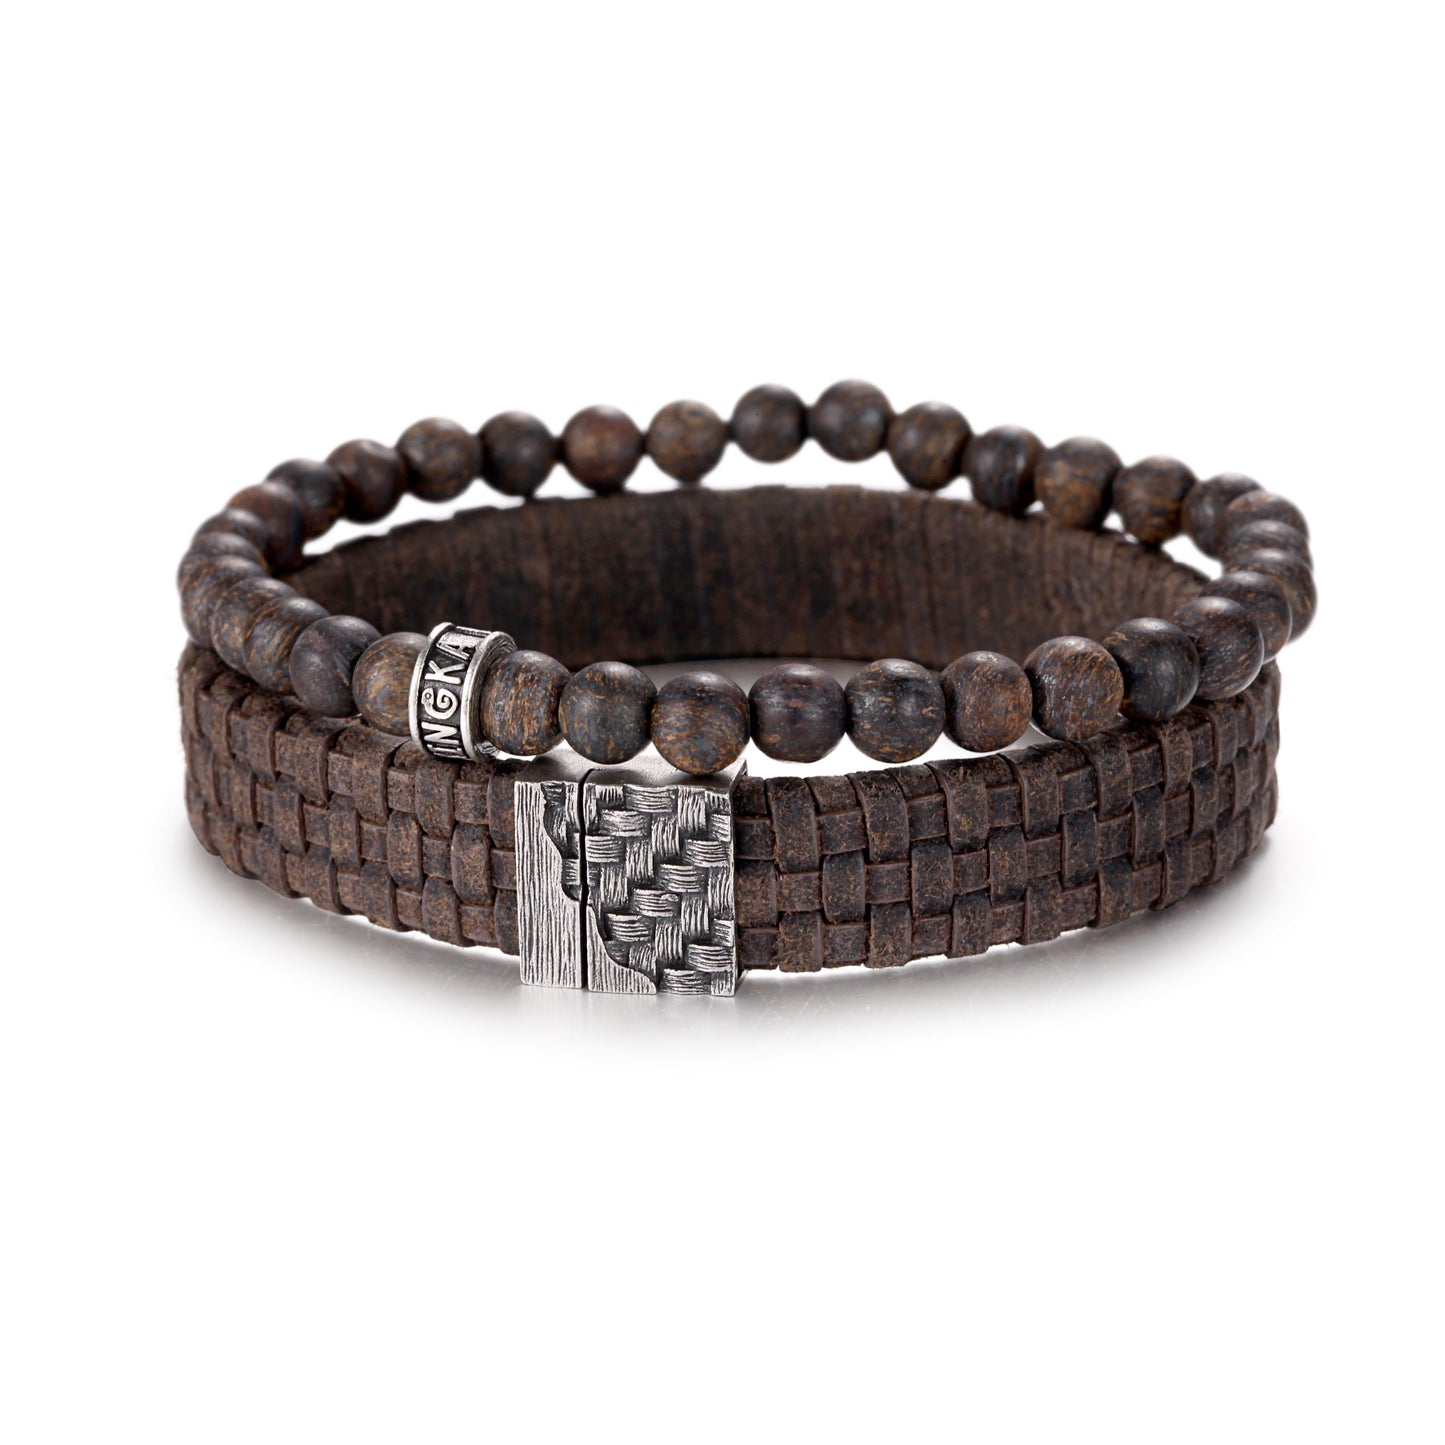 Men's Stacking Bracelet with Stones, Leather, Woven Lock - KINGKA Jewelry